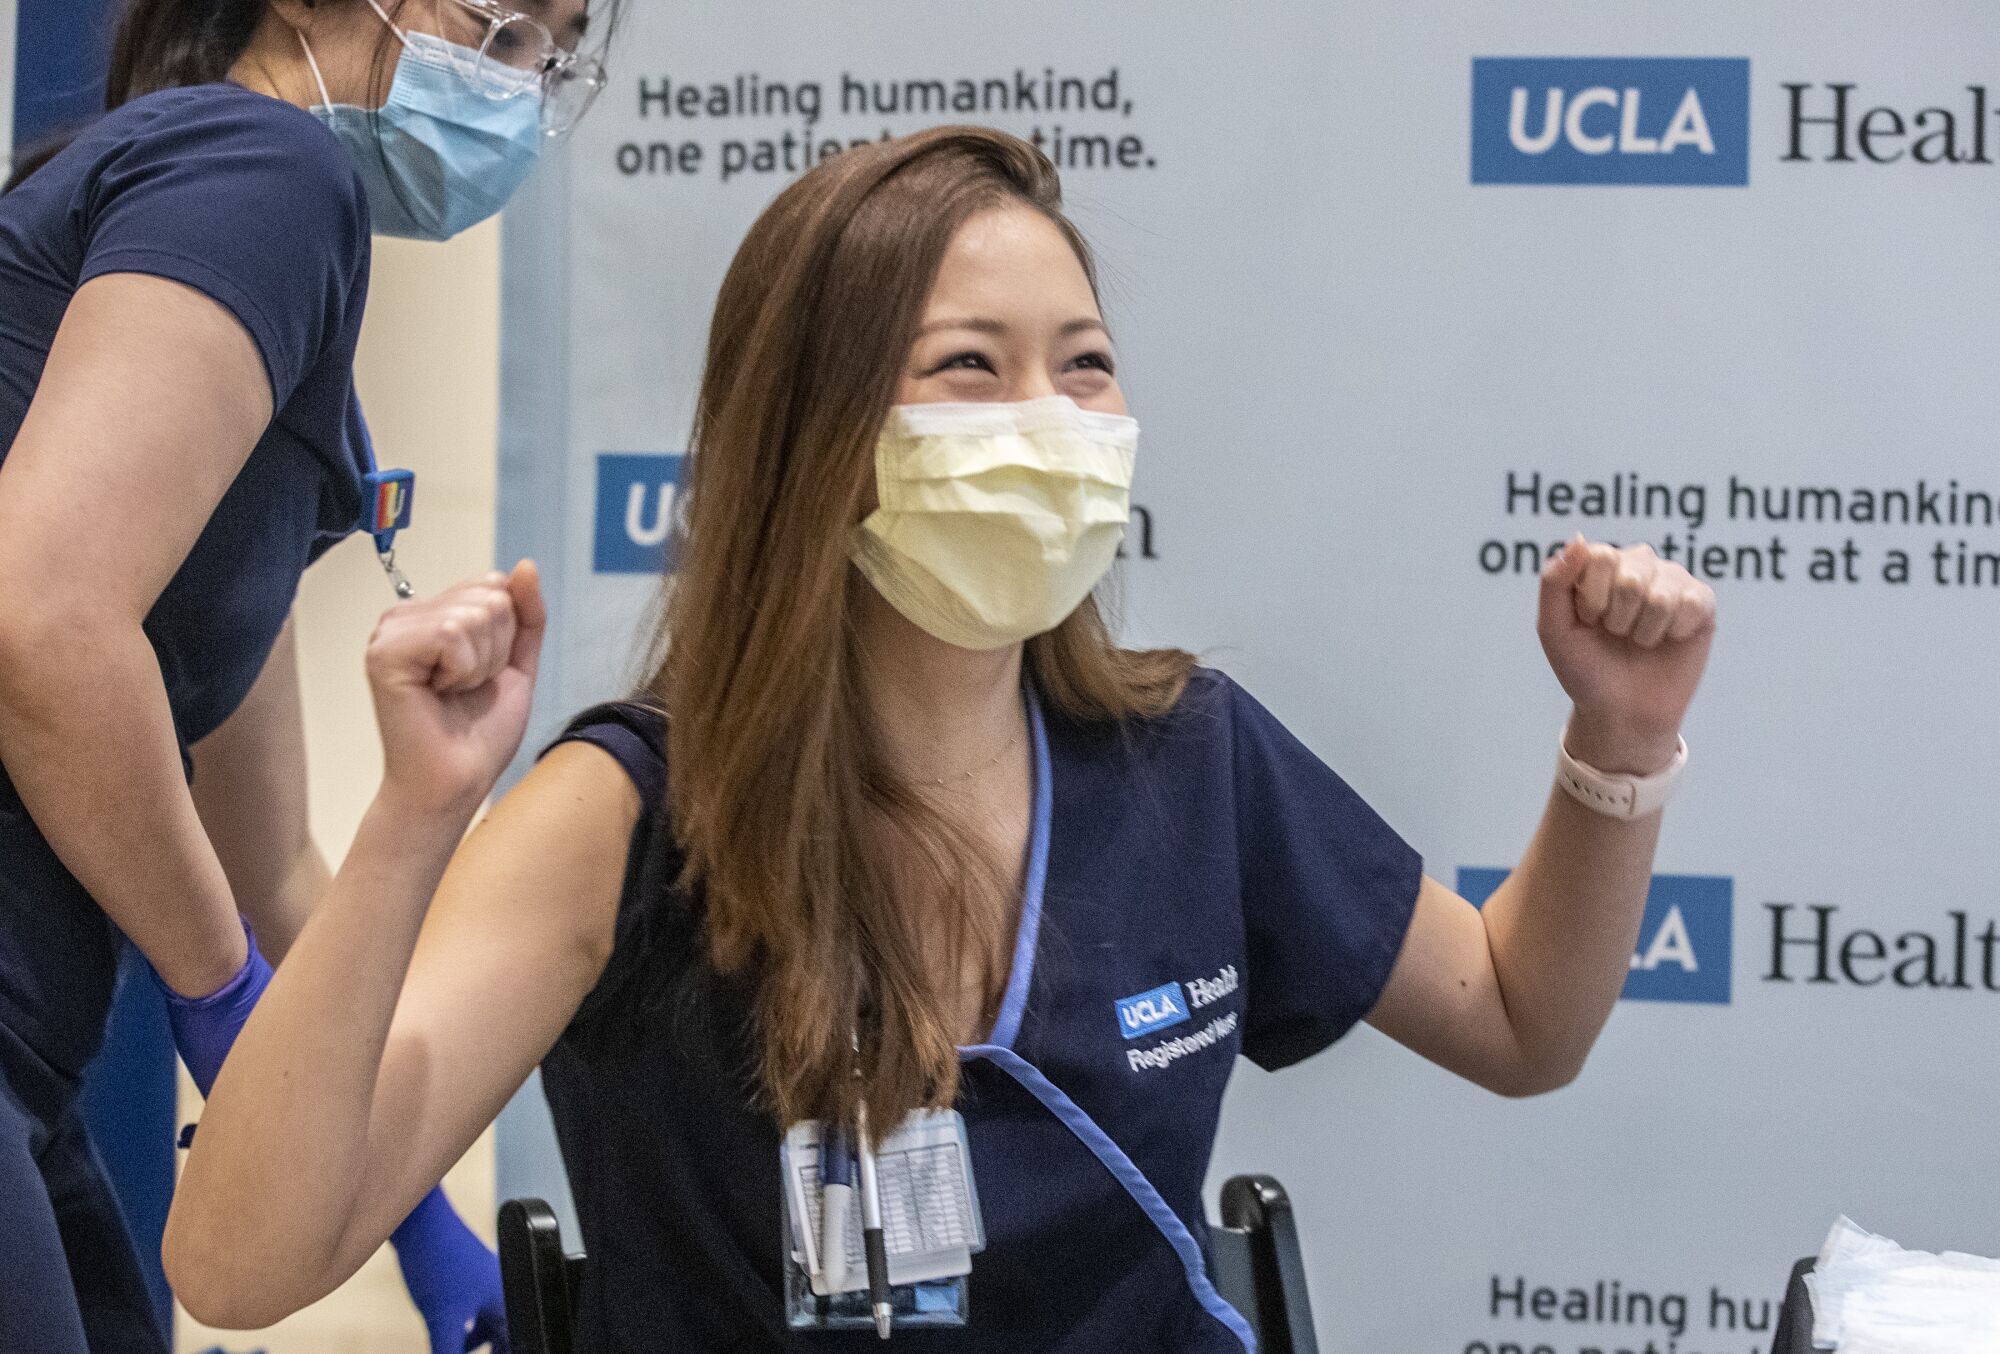 Nurse Nicole Chang celebrates after receiving one of the first doses of COVID-19 vaccine at Ronald Reagan UCLA Medical Center